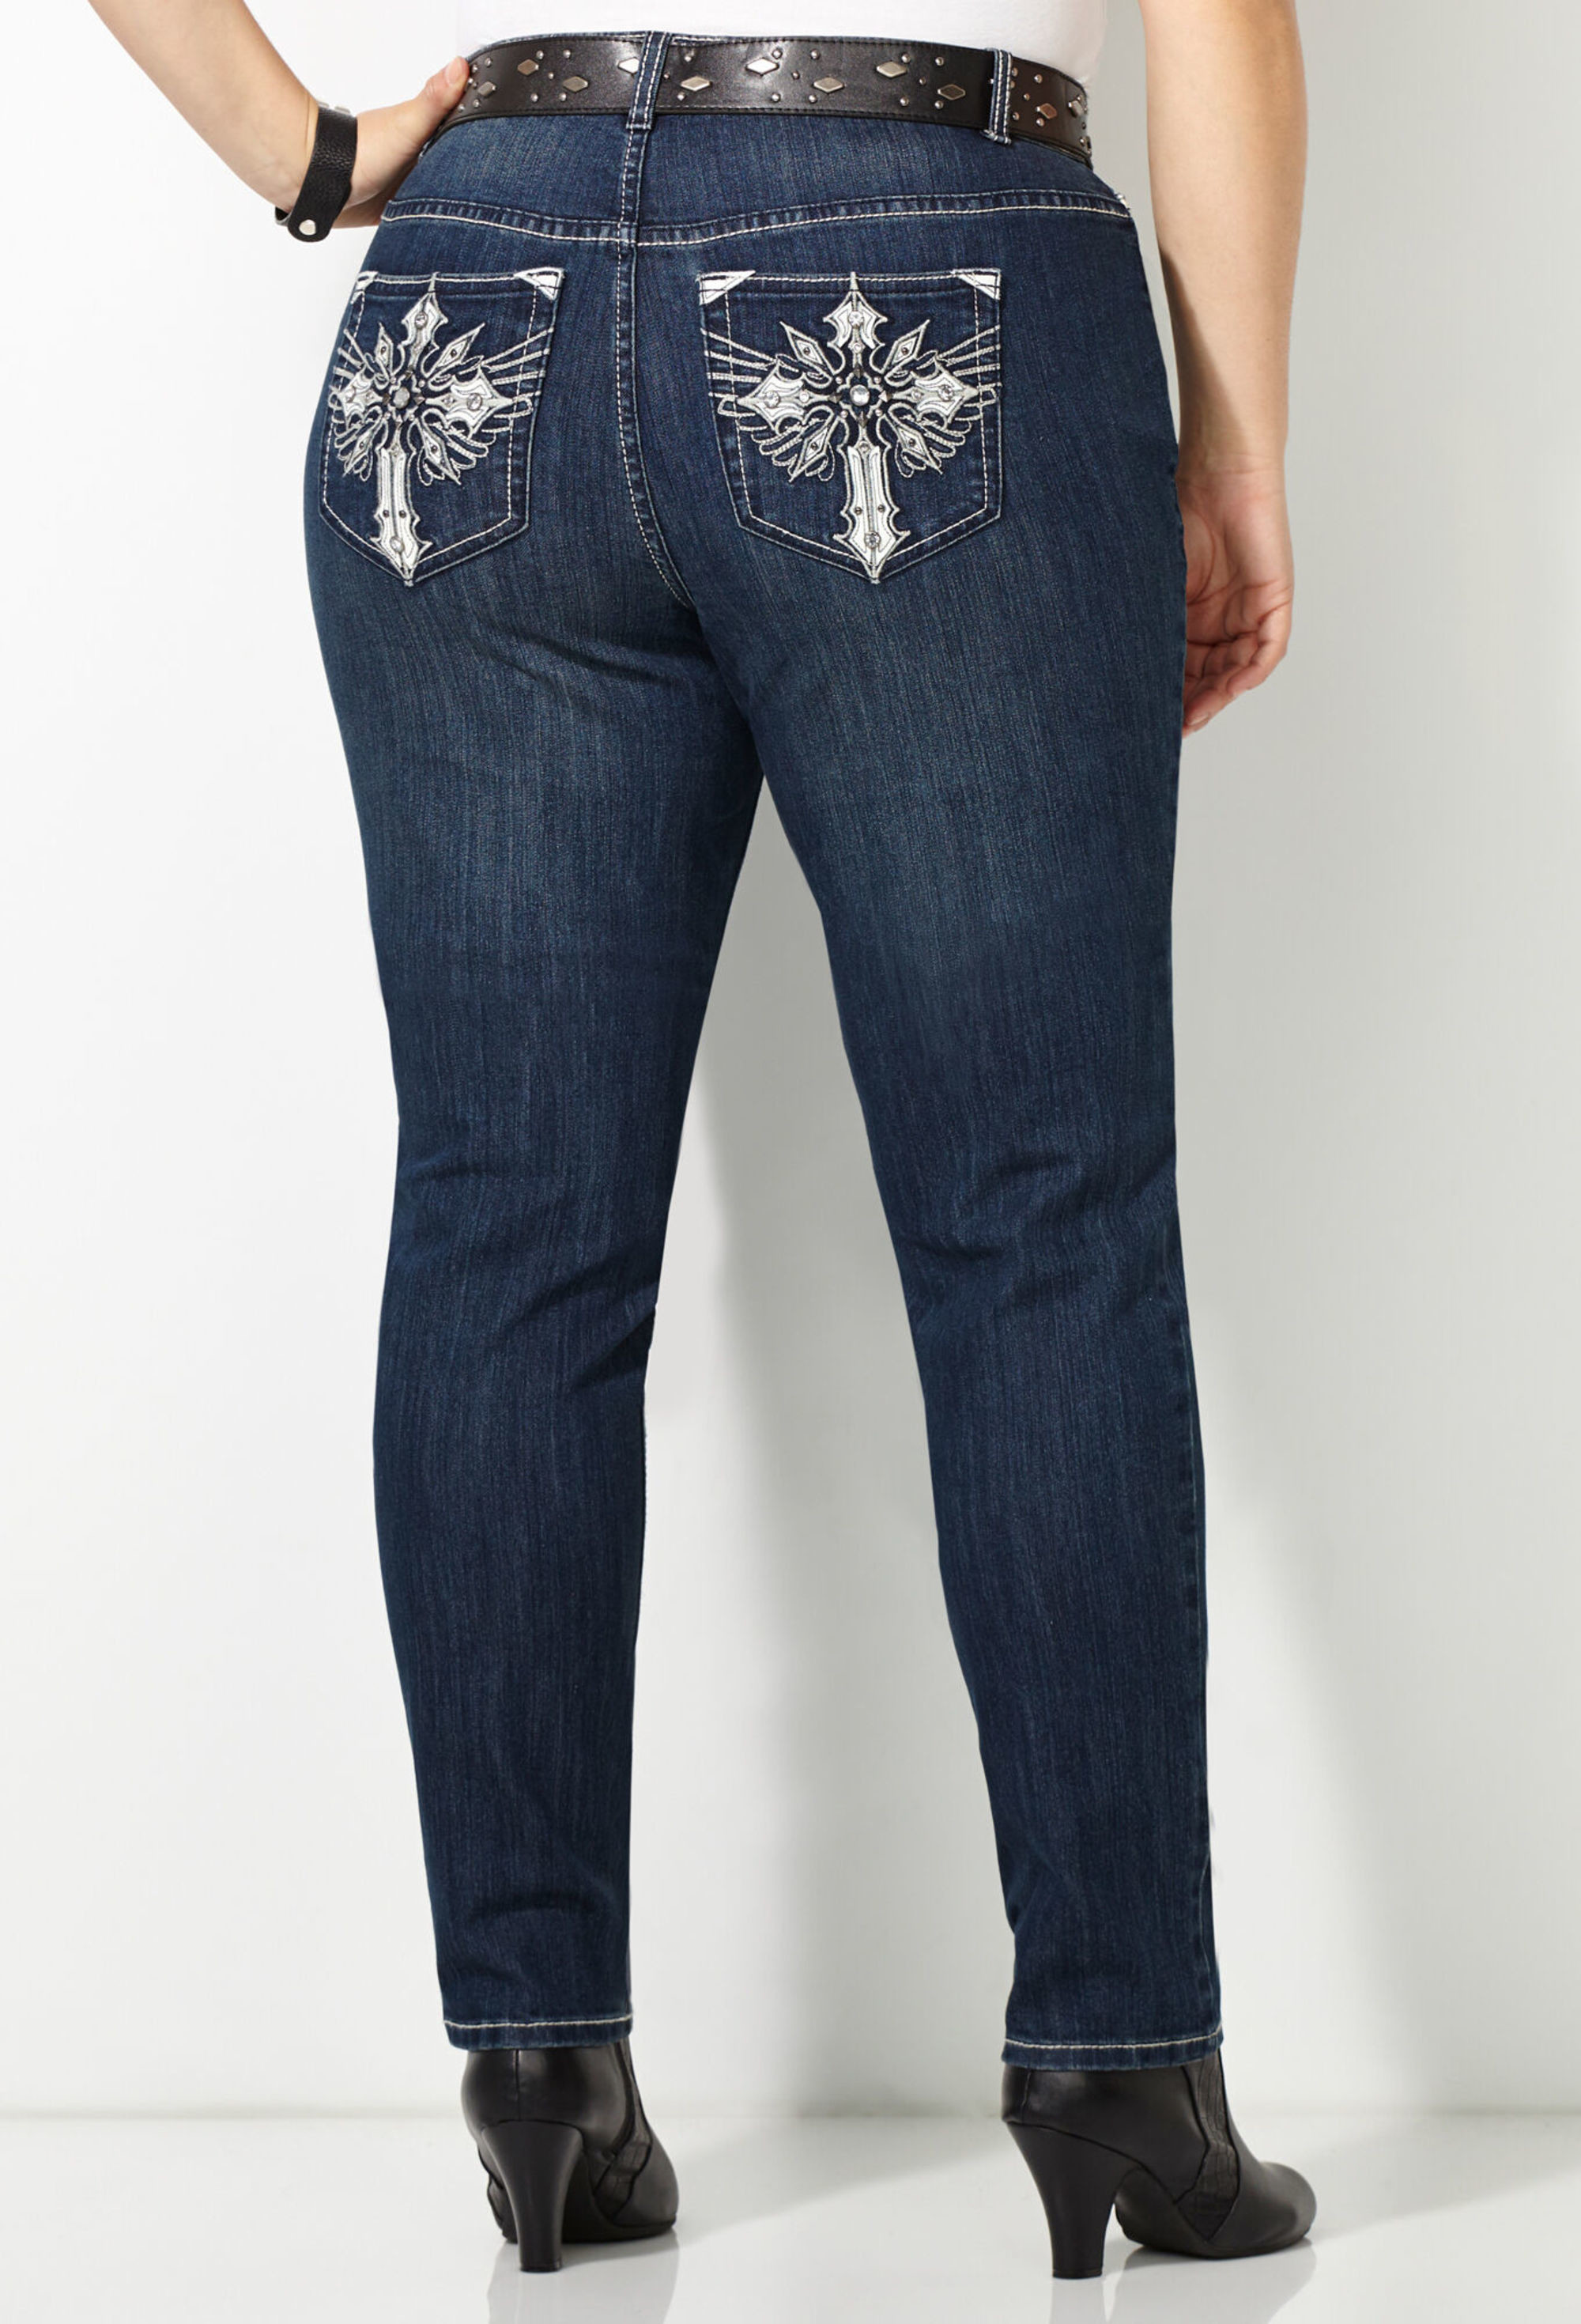 plus size jean capris with bling